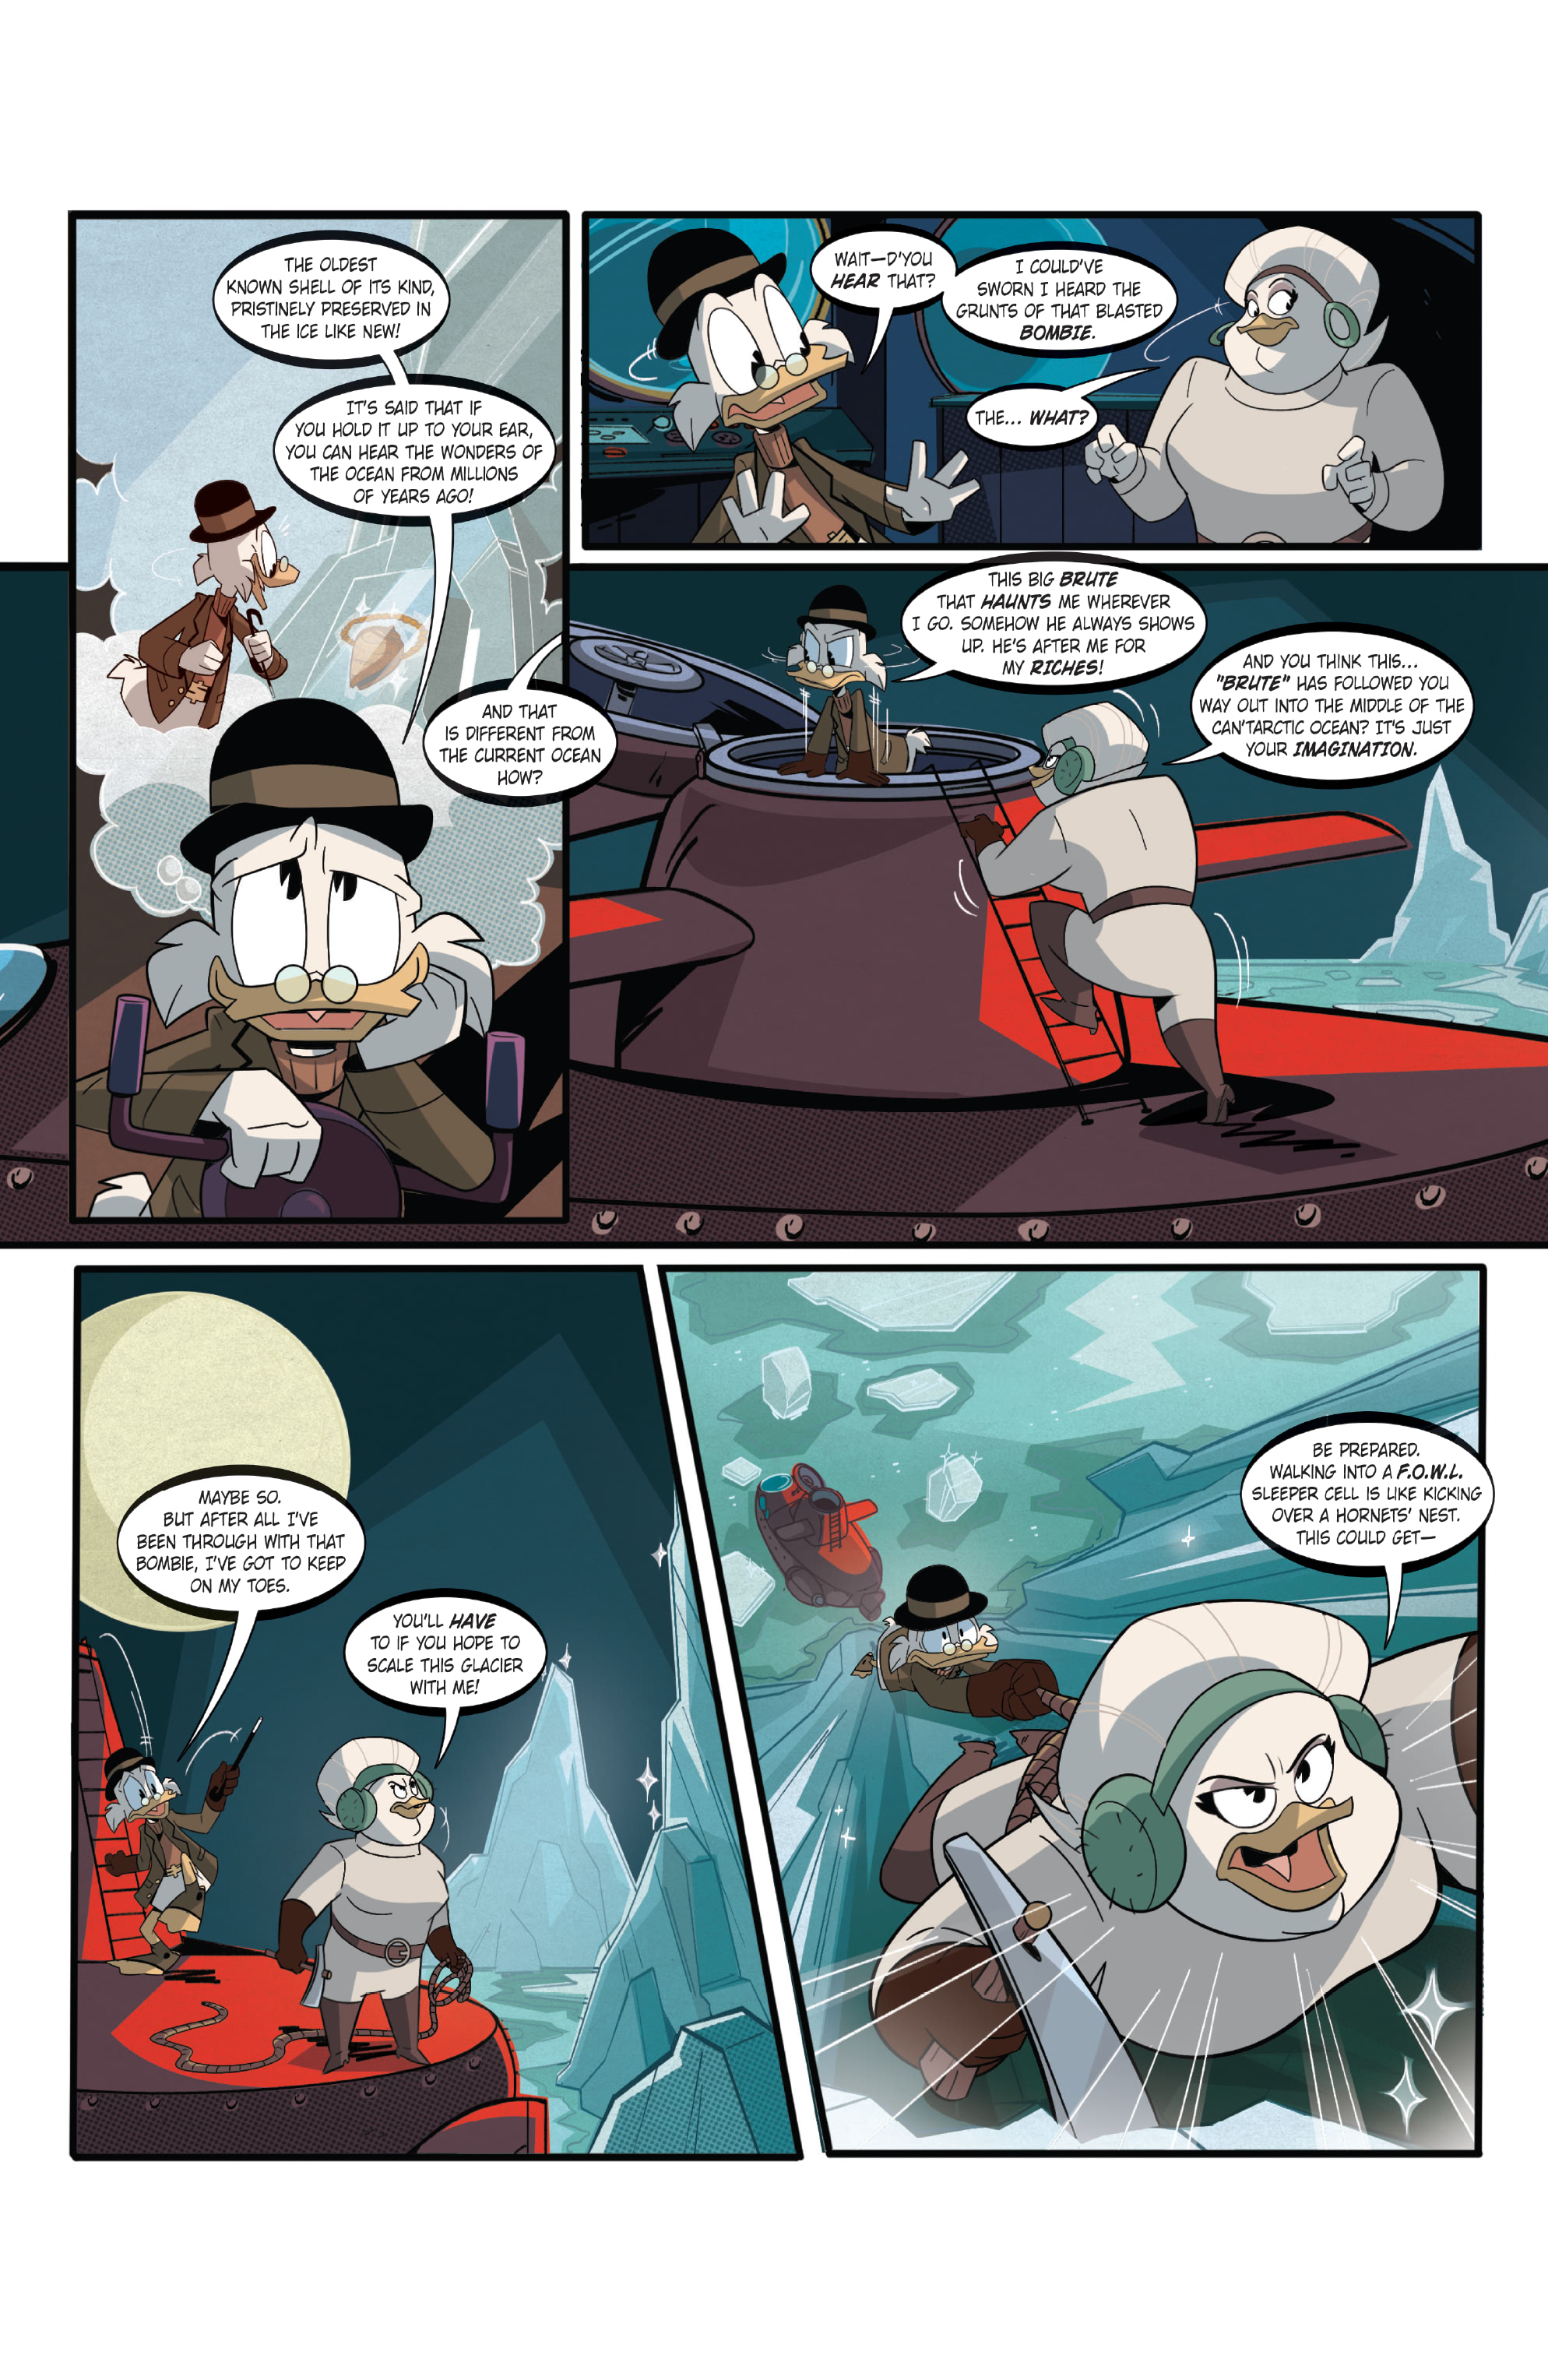 DuckTales: Faires And Scares (2020-): Chapter 3 - Page 5